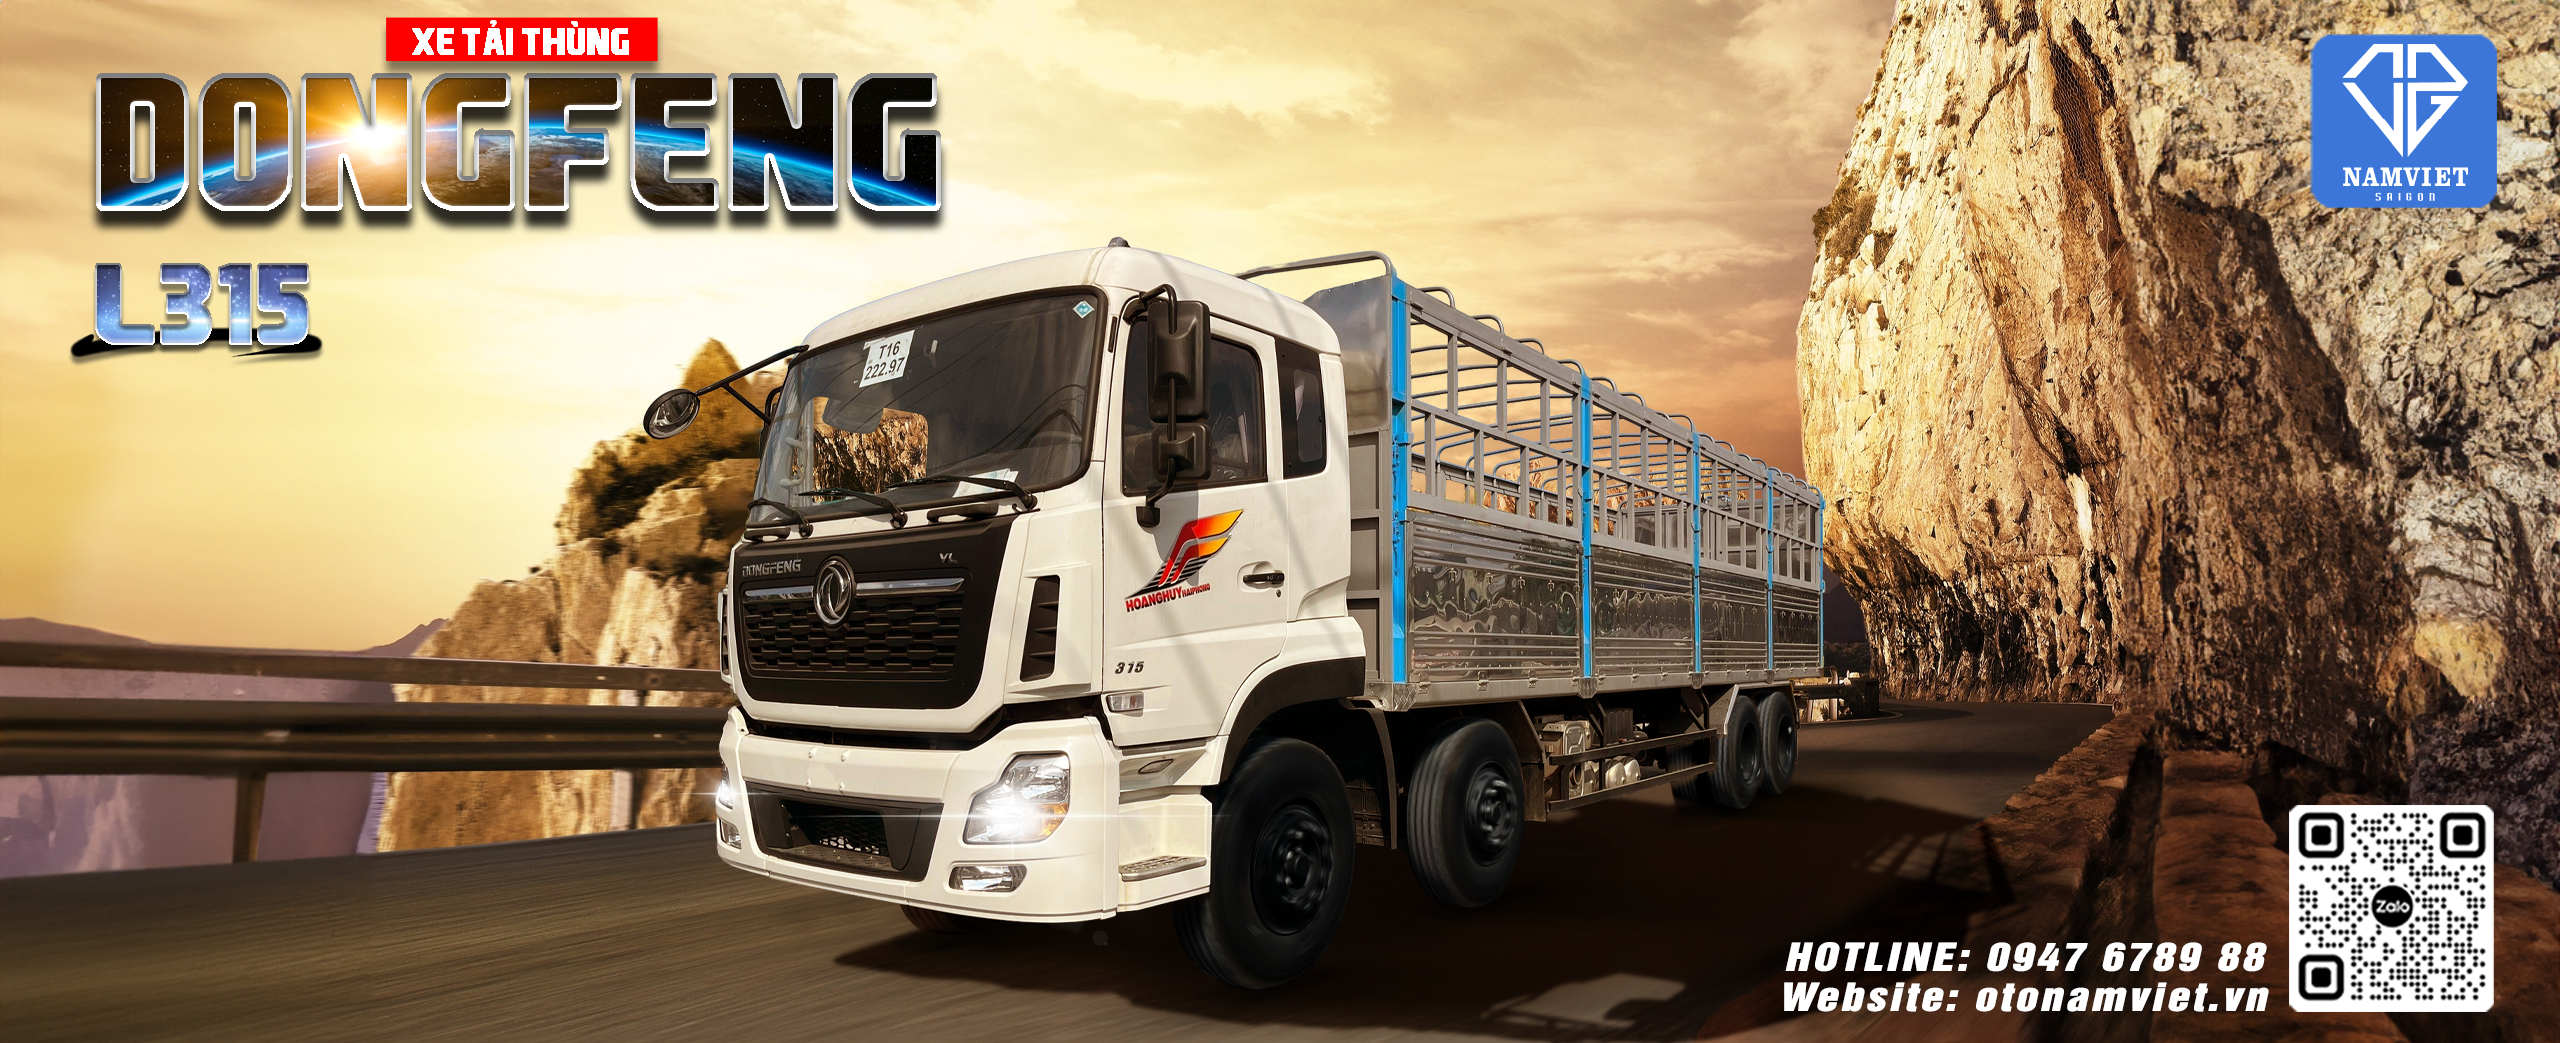 dongfeng d325